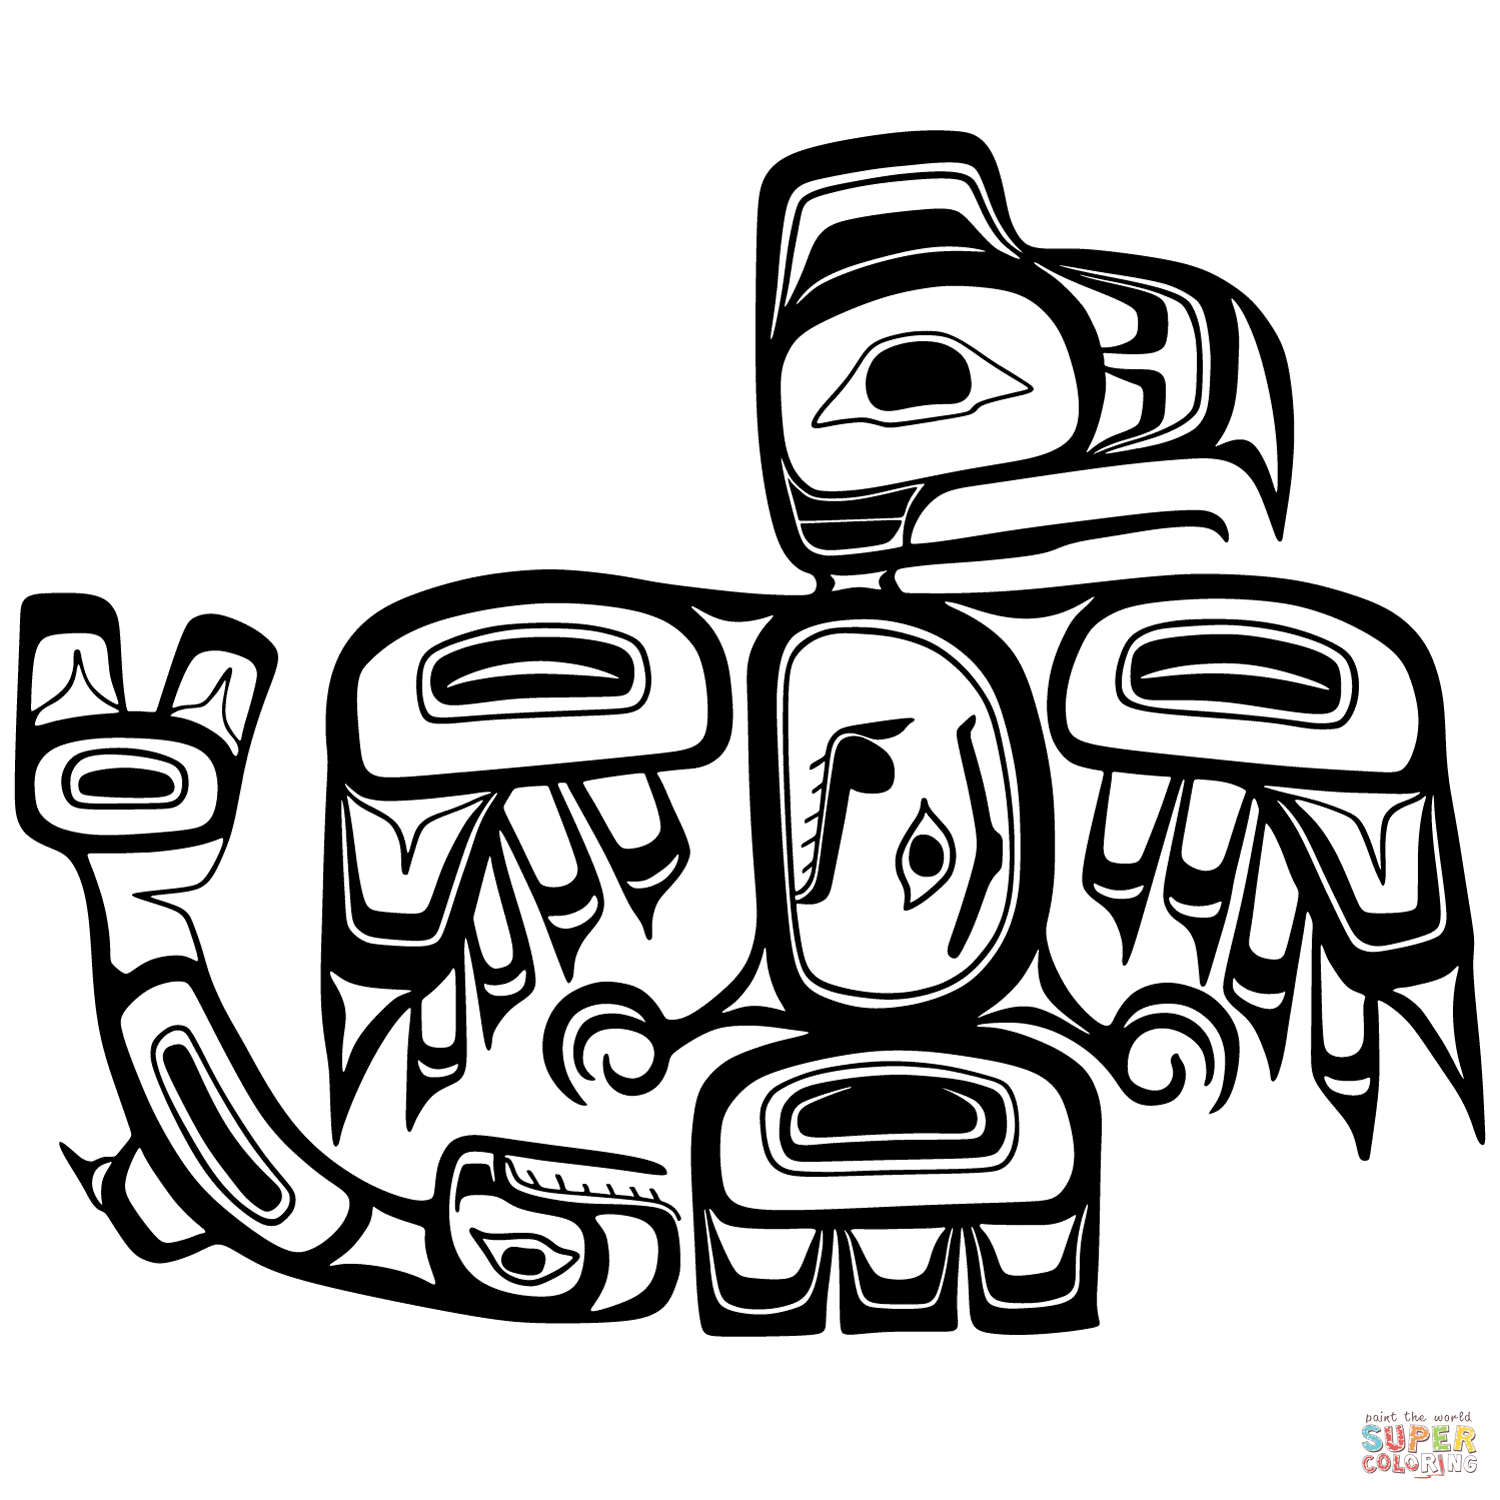 canadian-aboriginal-art-coloring-page-free-coloring-page-coloring-home